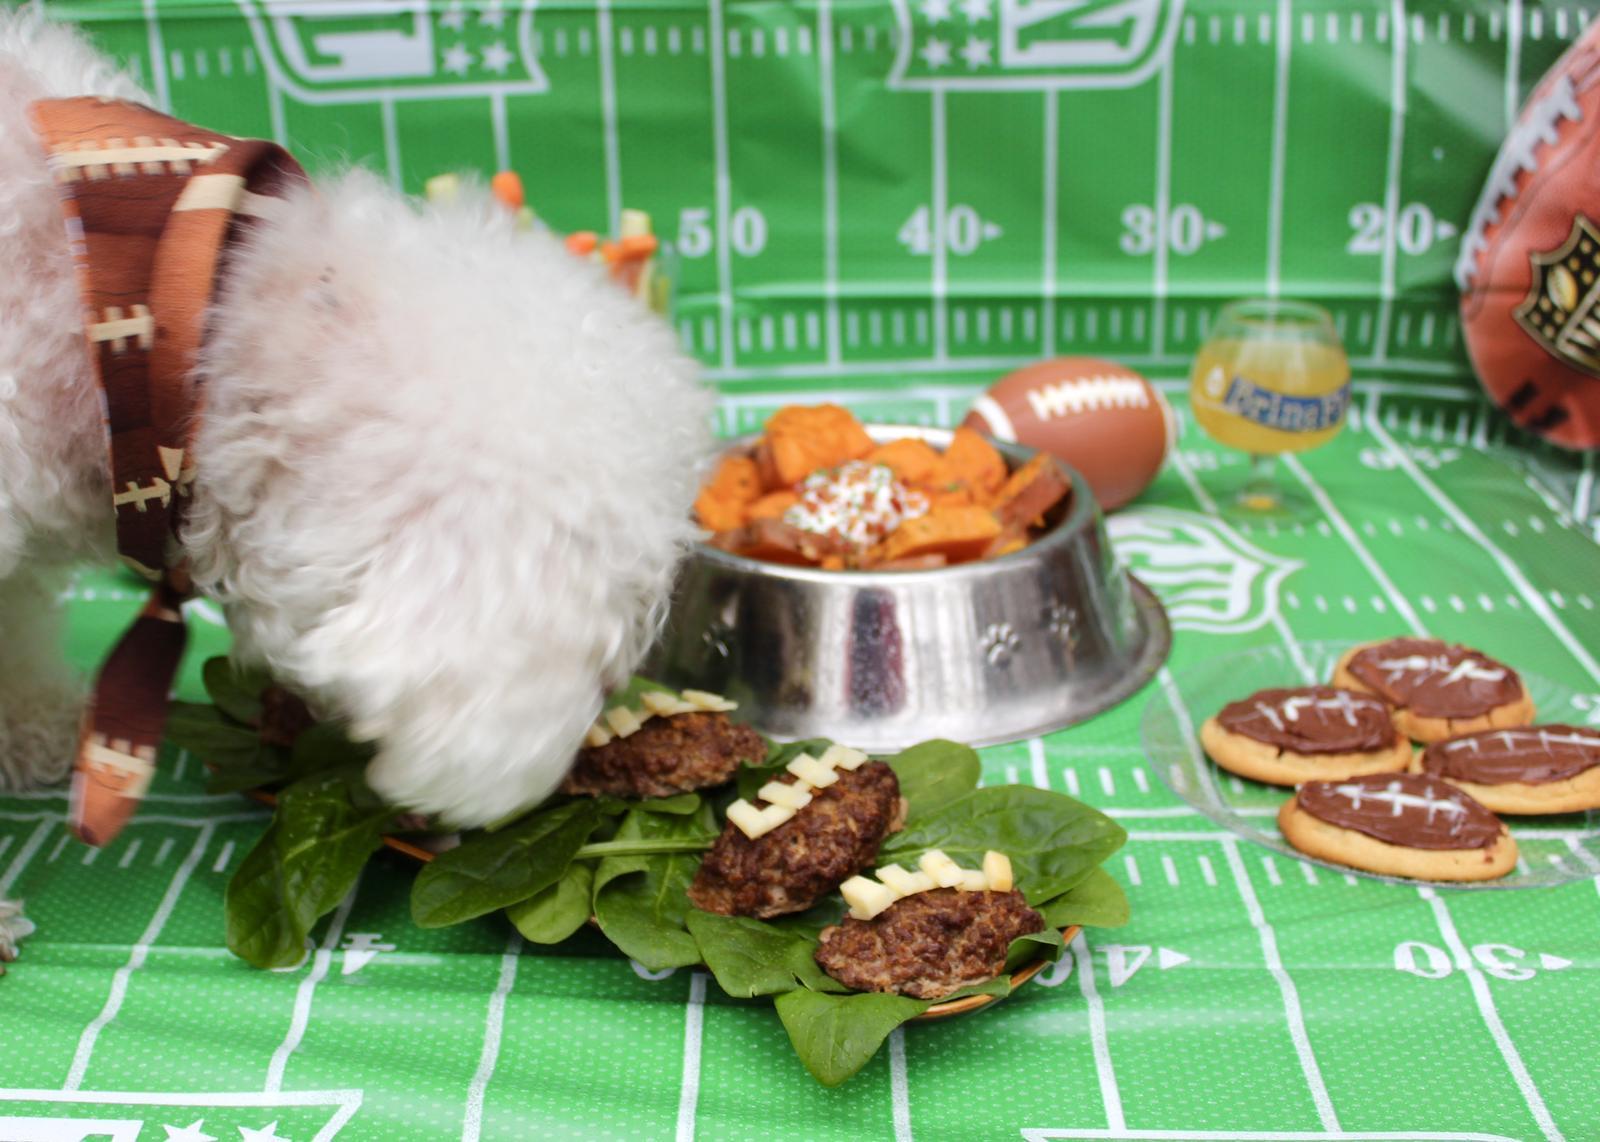 The “Supper” Bowl: Dog-Friendly Snacks for the Big Game